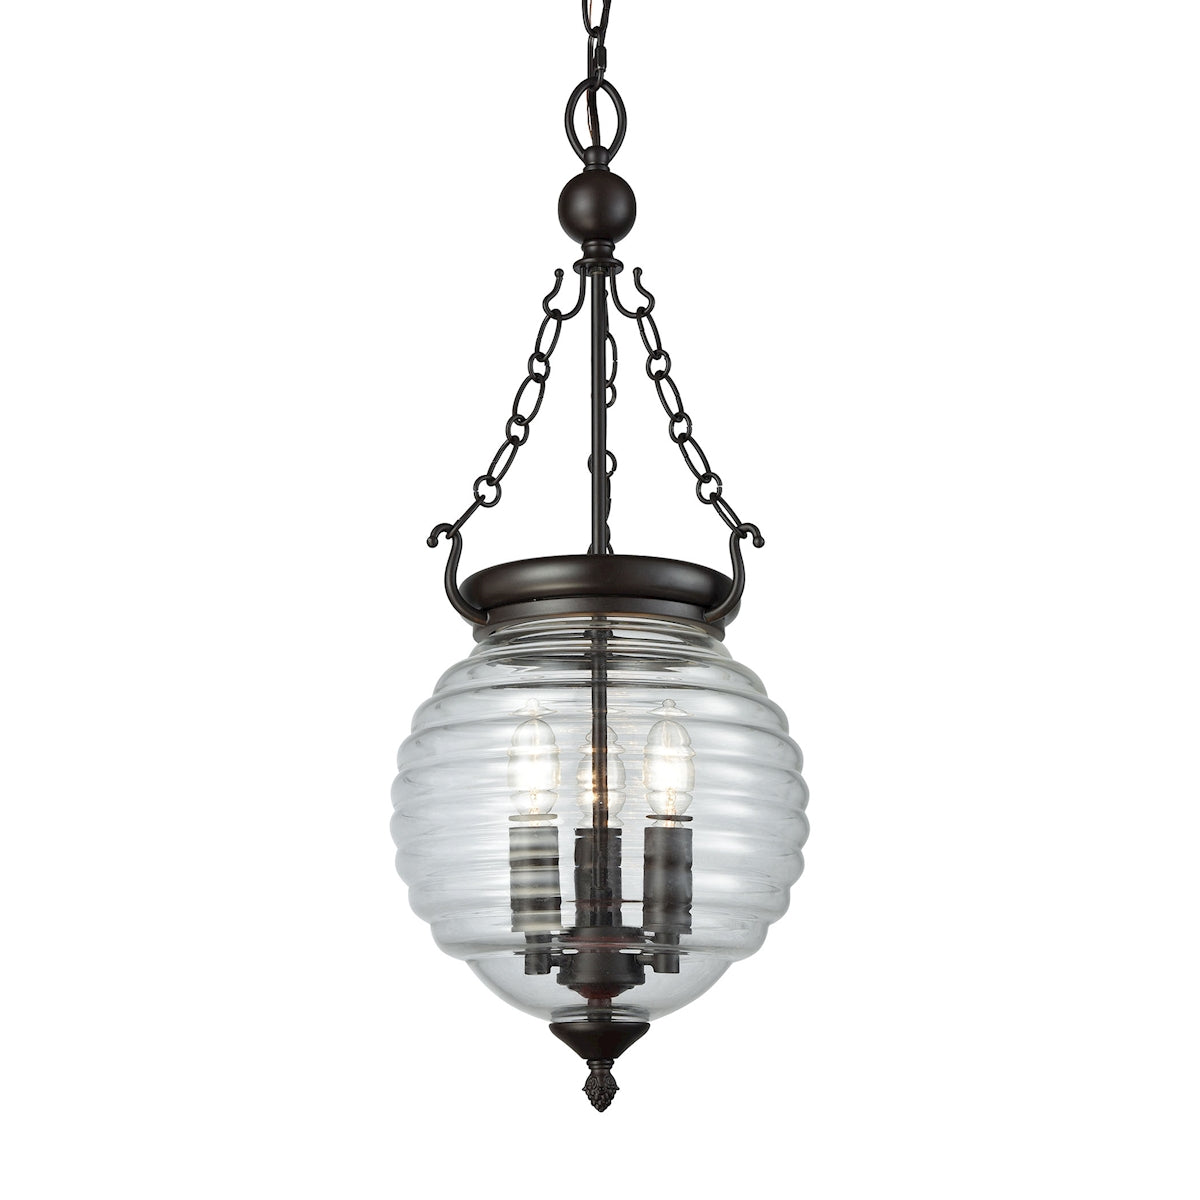 ELK Lighting 56540/3 Crosswell 3-Light Chandelier in Oil Rubbed Bronze with Clear Beehive Glass